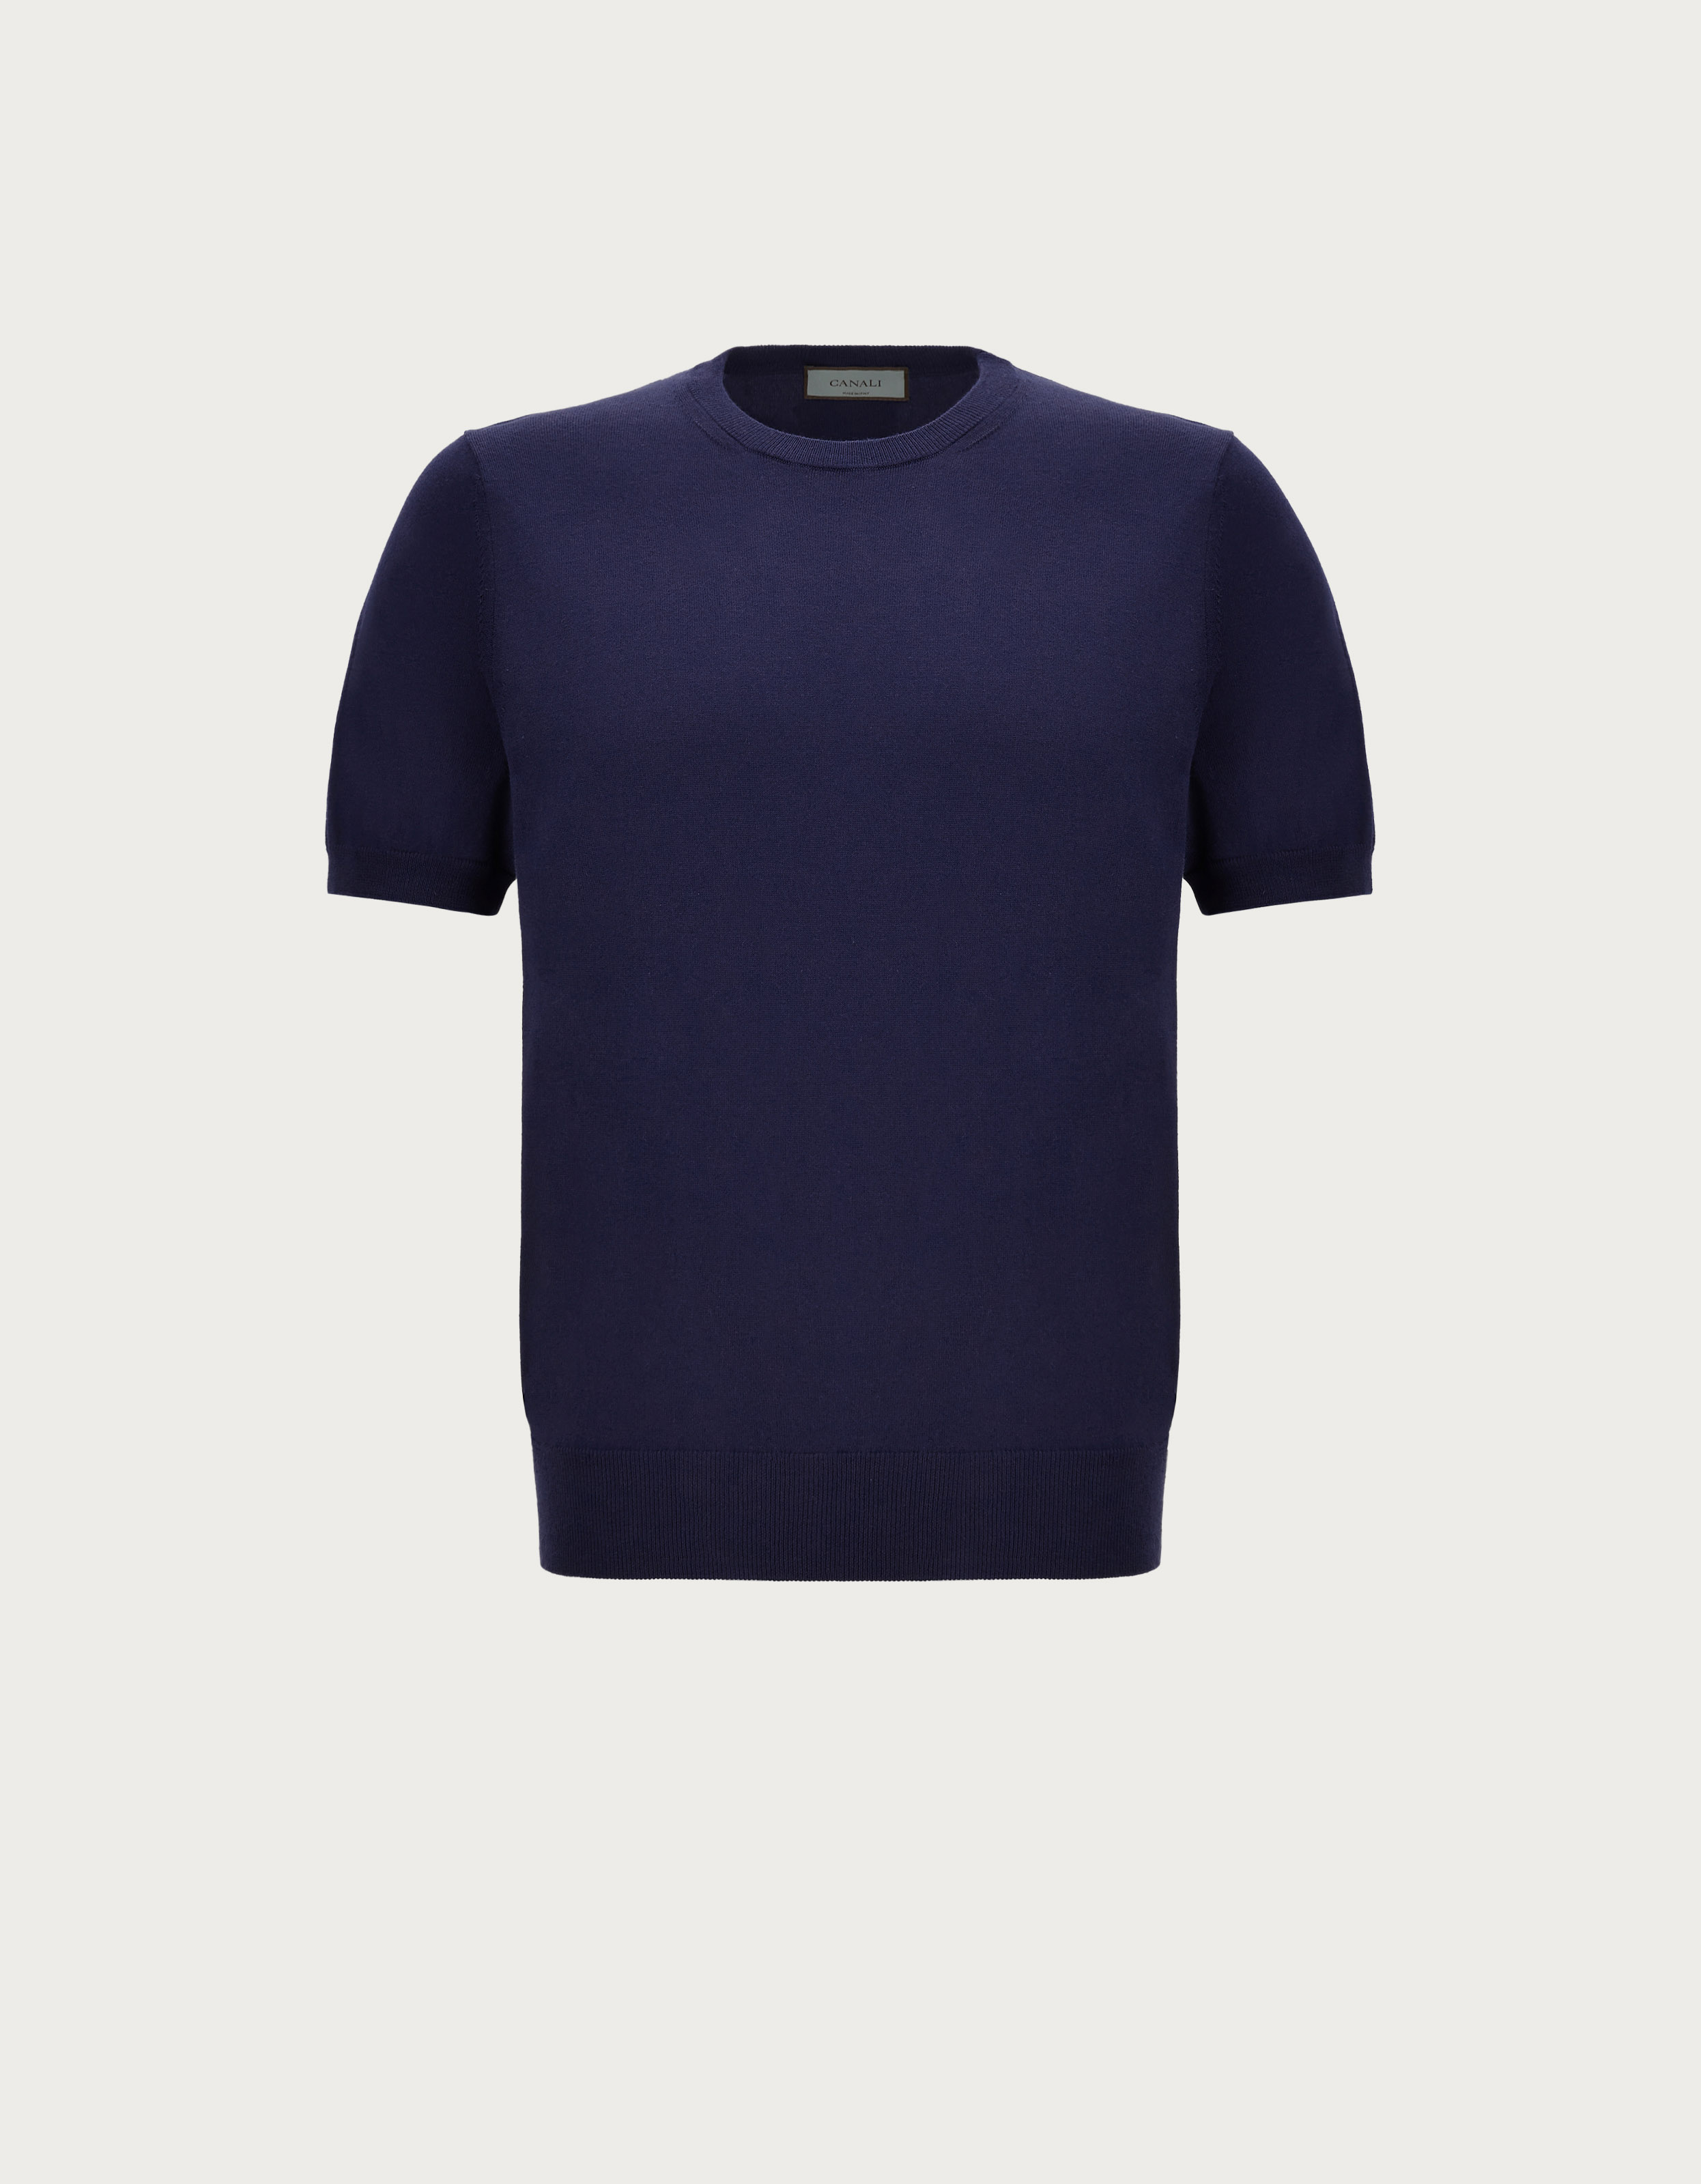 Navy blue crew-neck in shaved cotton - Canali US